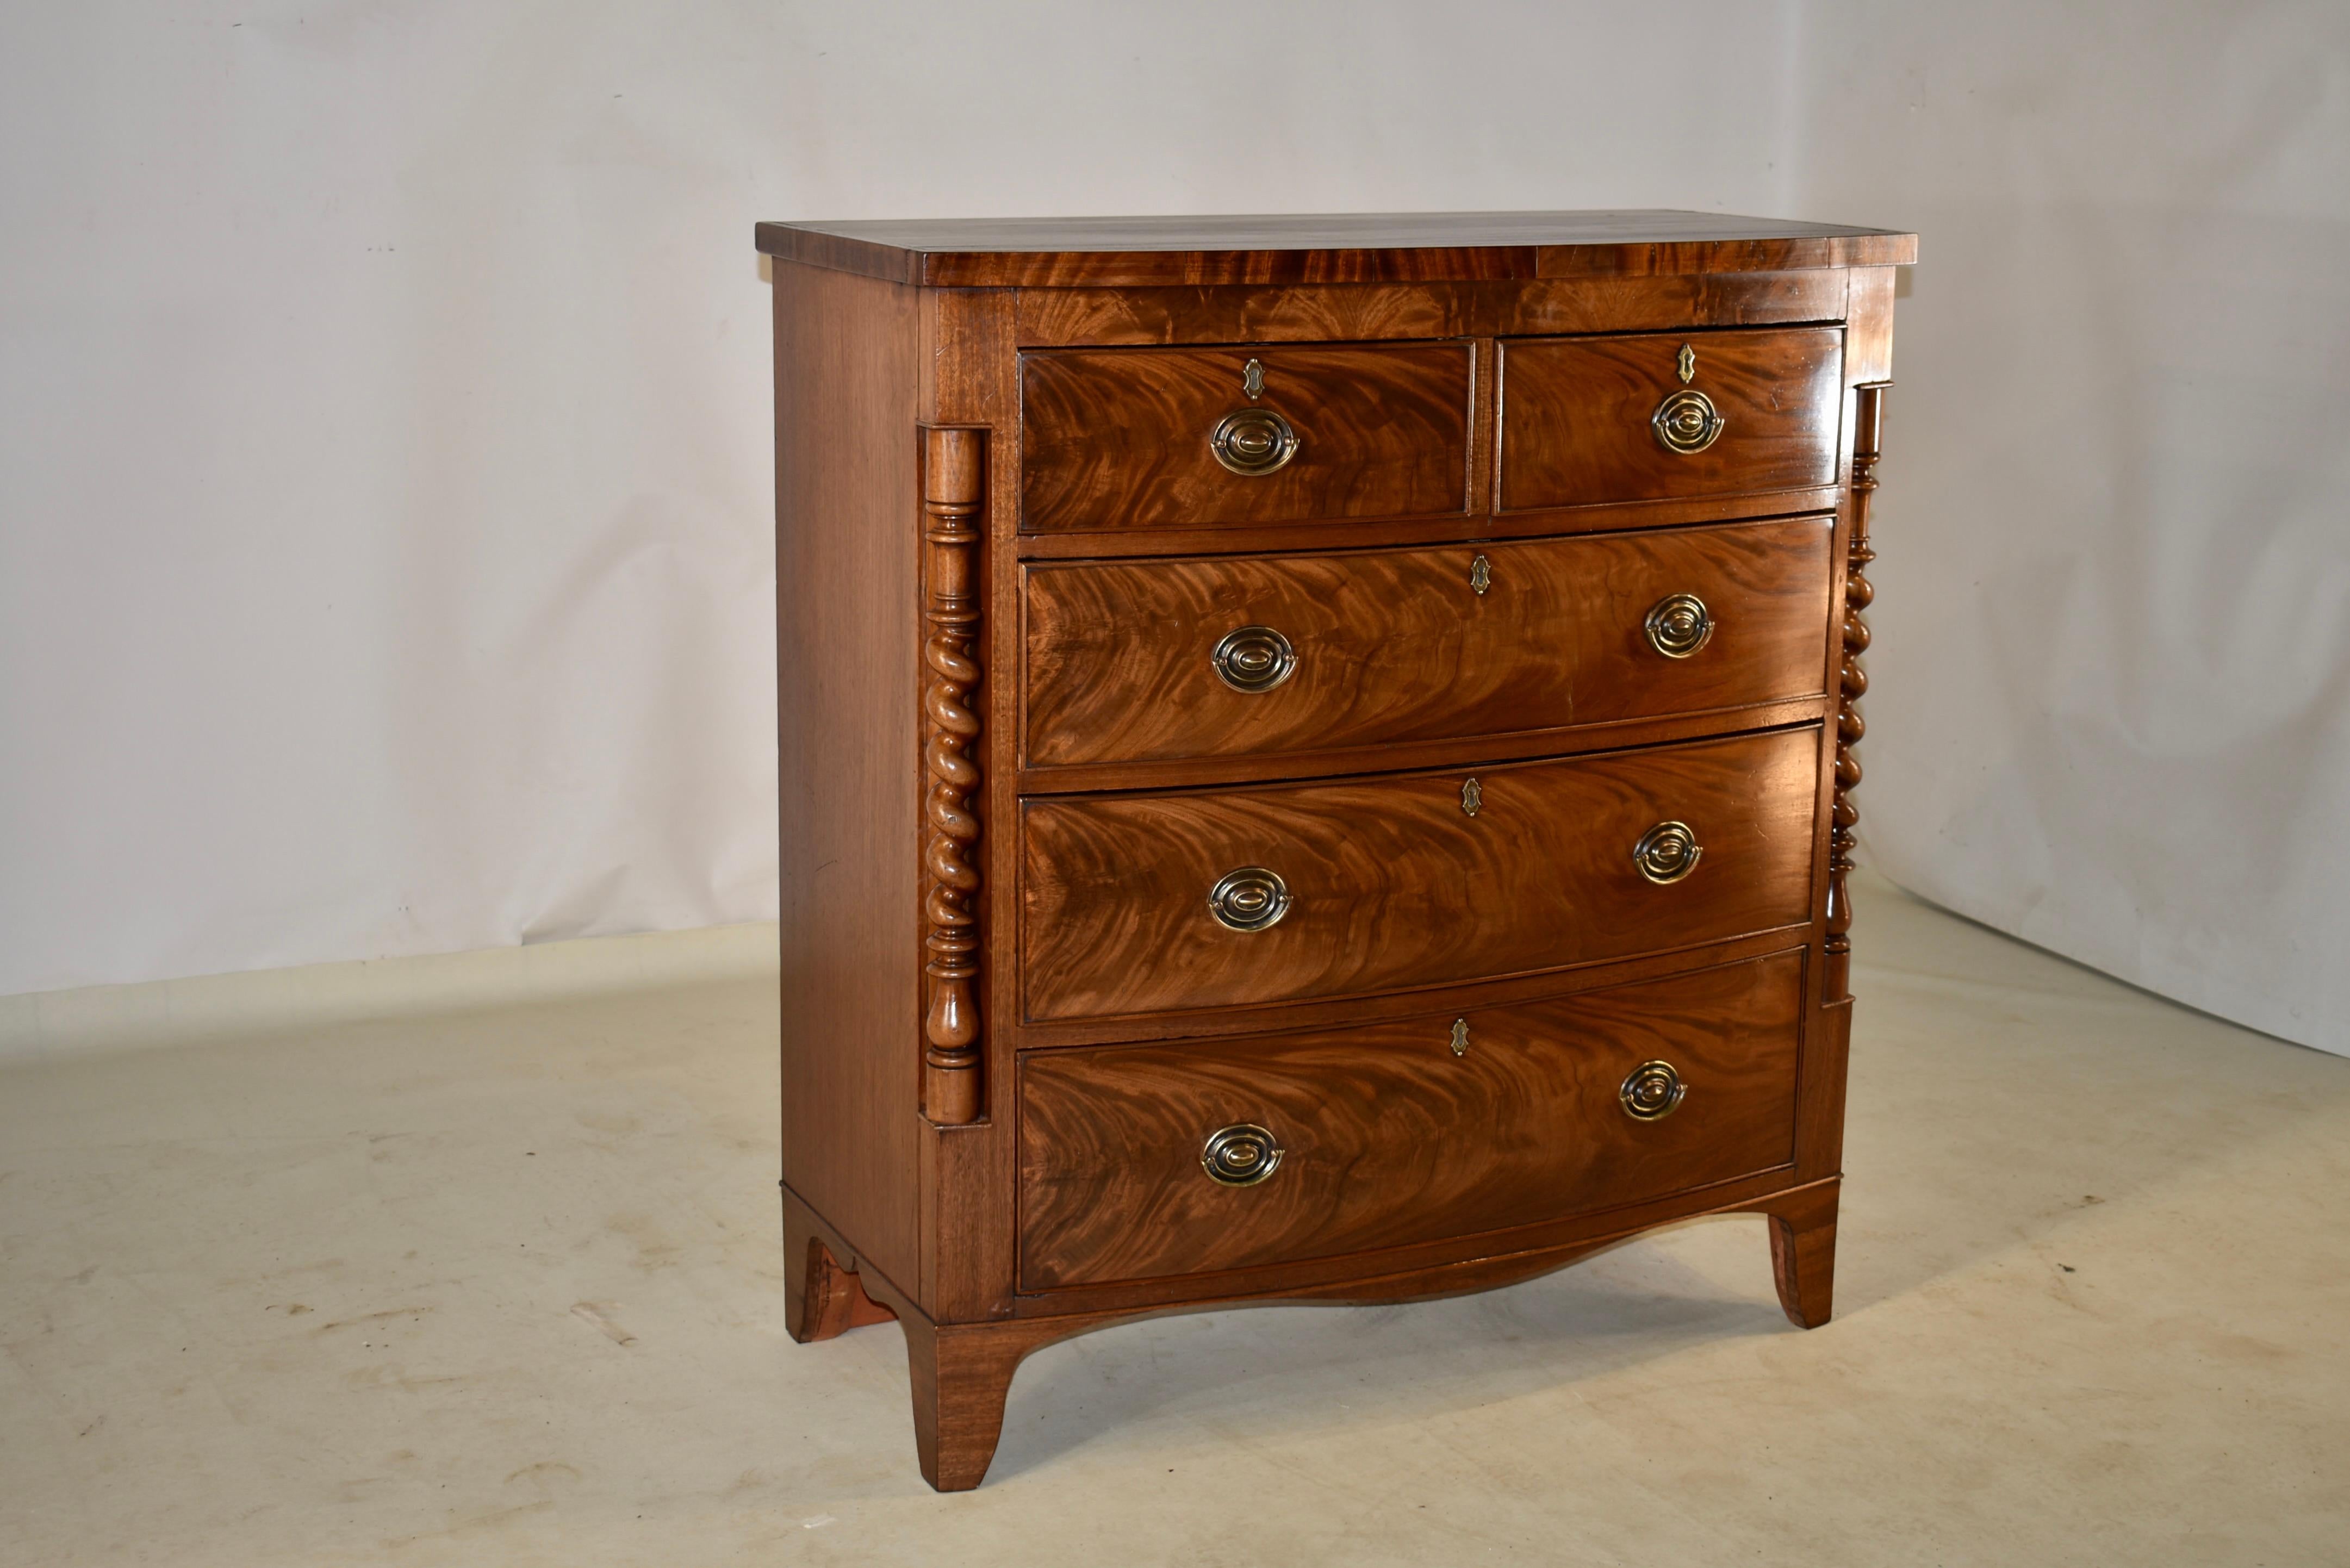 19th century mahogany bow front chest of drawers from England. This chest has fantastic graining and color throughout. The top is beautifully grained and follows down to simple sides and two drawers over three drawers in the front, flanked by turned